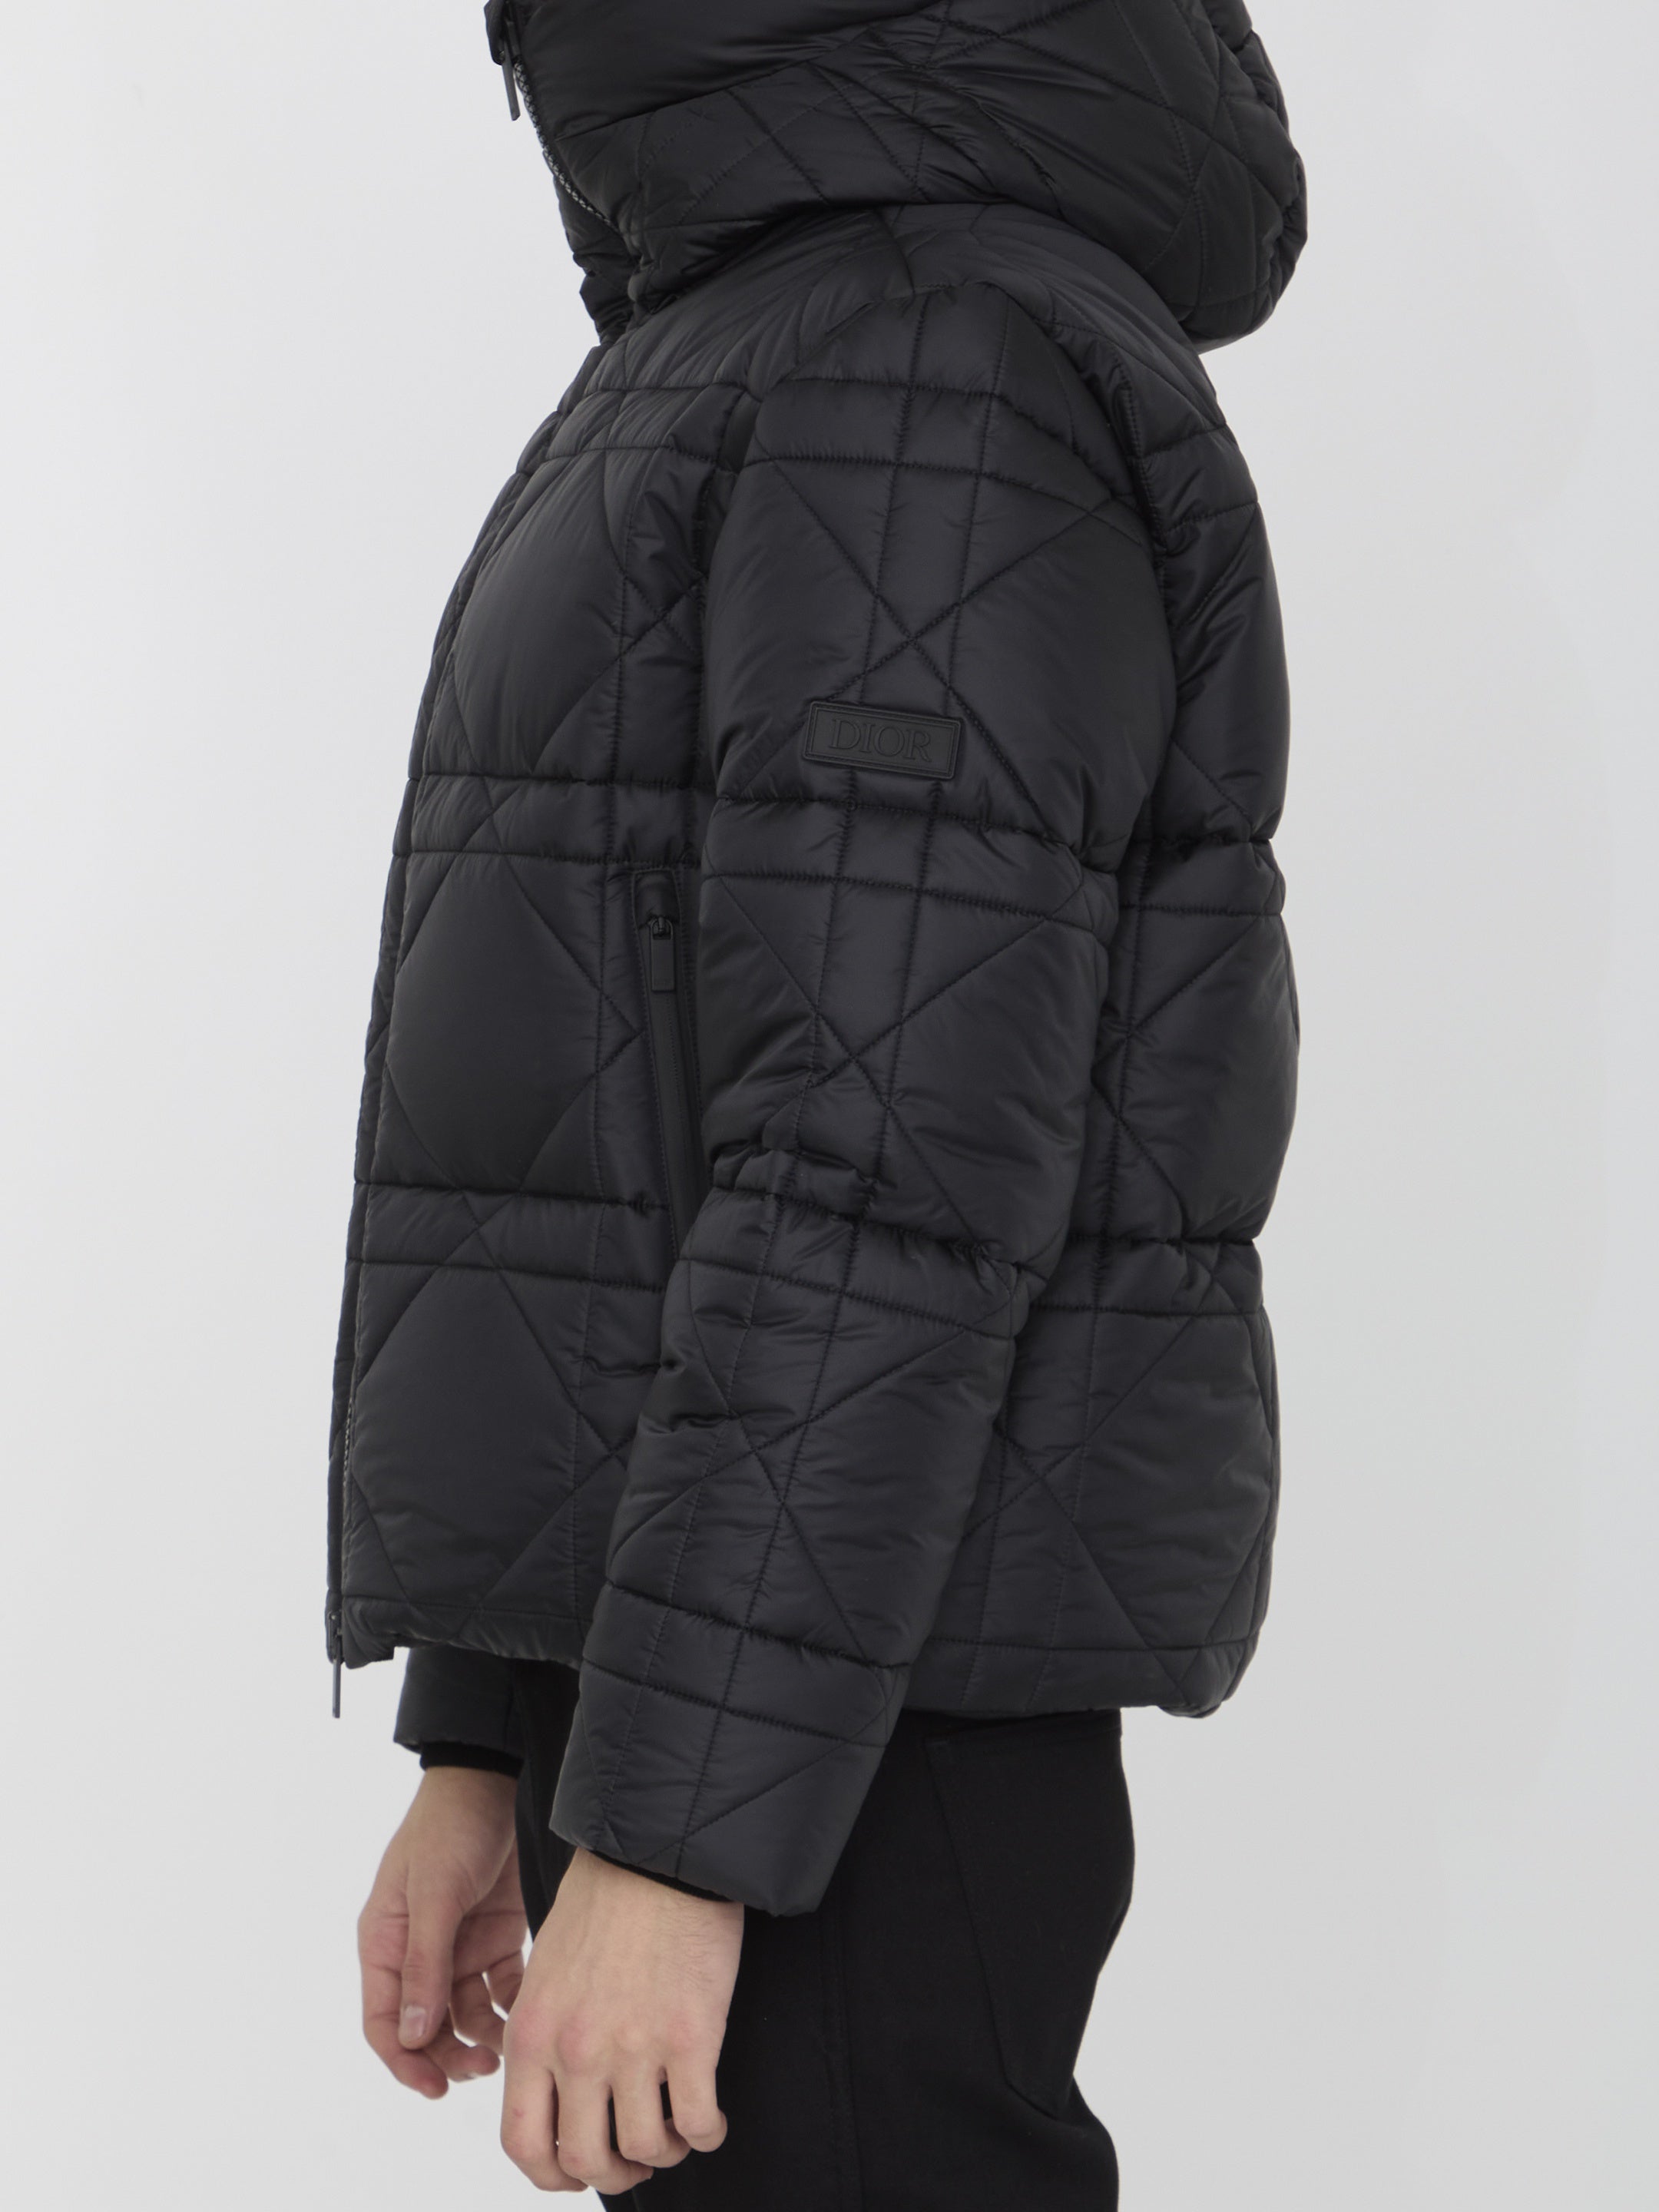 DIOR-HOMME-OUTLET-SALE-Cannage-puffer-jacket-Jacken-Mantel-50-BLACK-ARCHIVE-COLLECTION-3.jpg